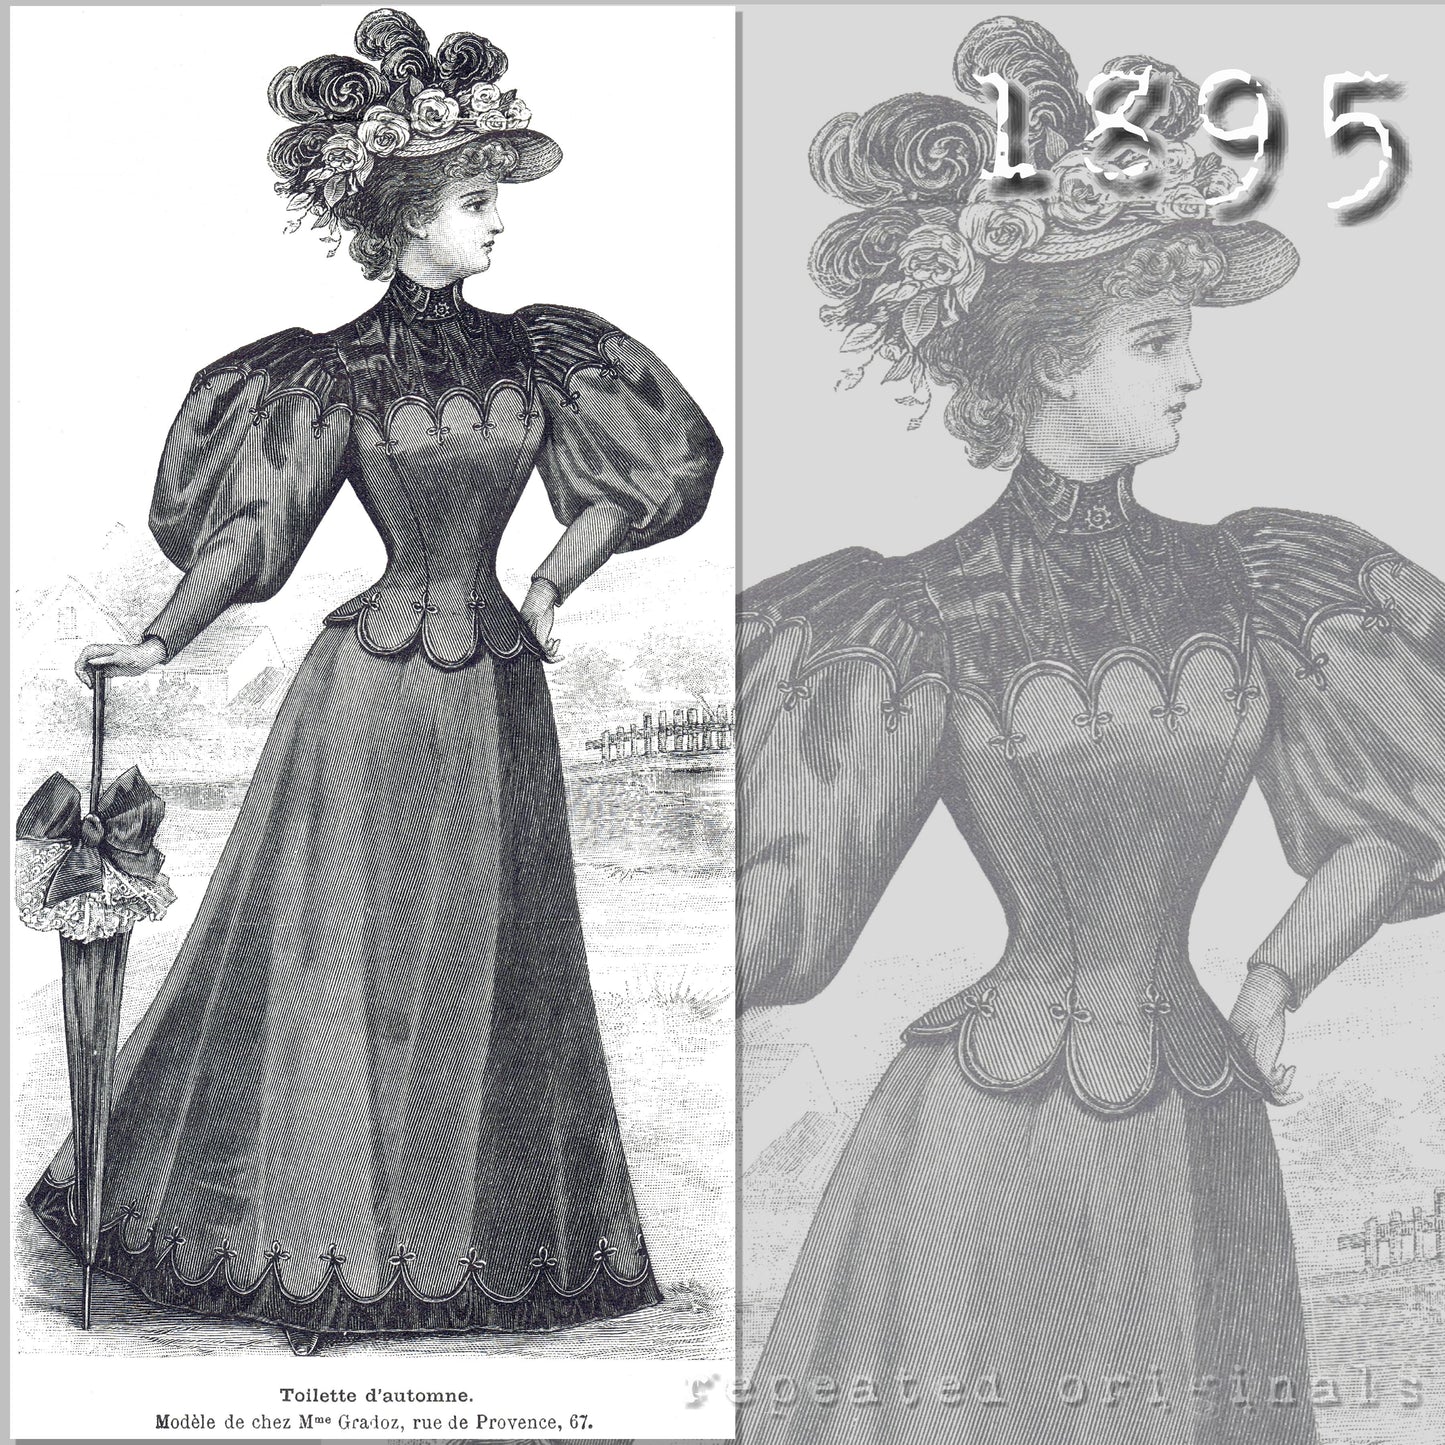 1895 Autumn Dress Sewing Pattern - INSTANT DOWNLOAD PDF